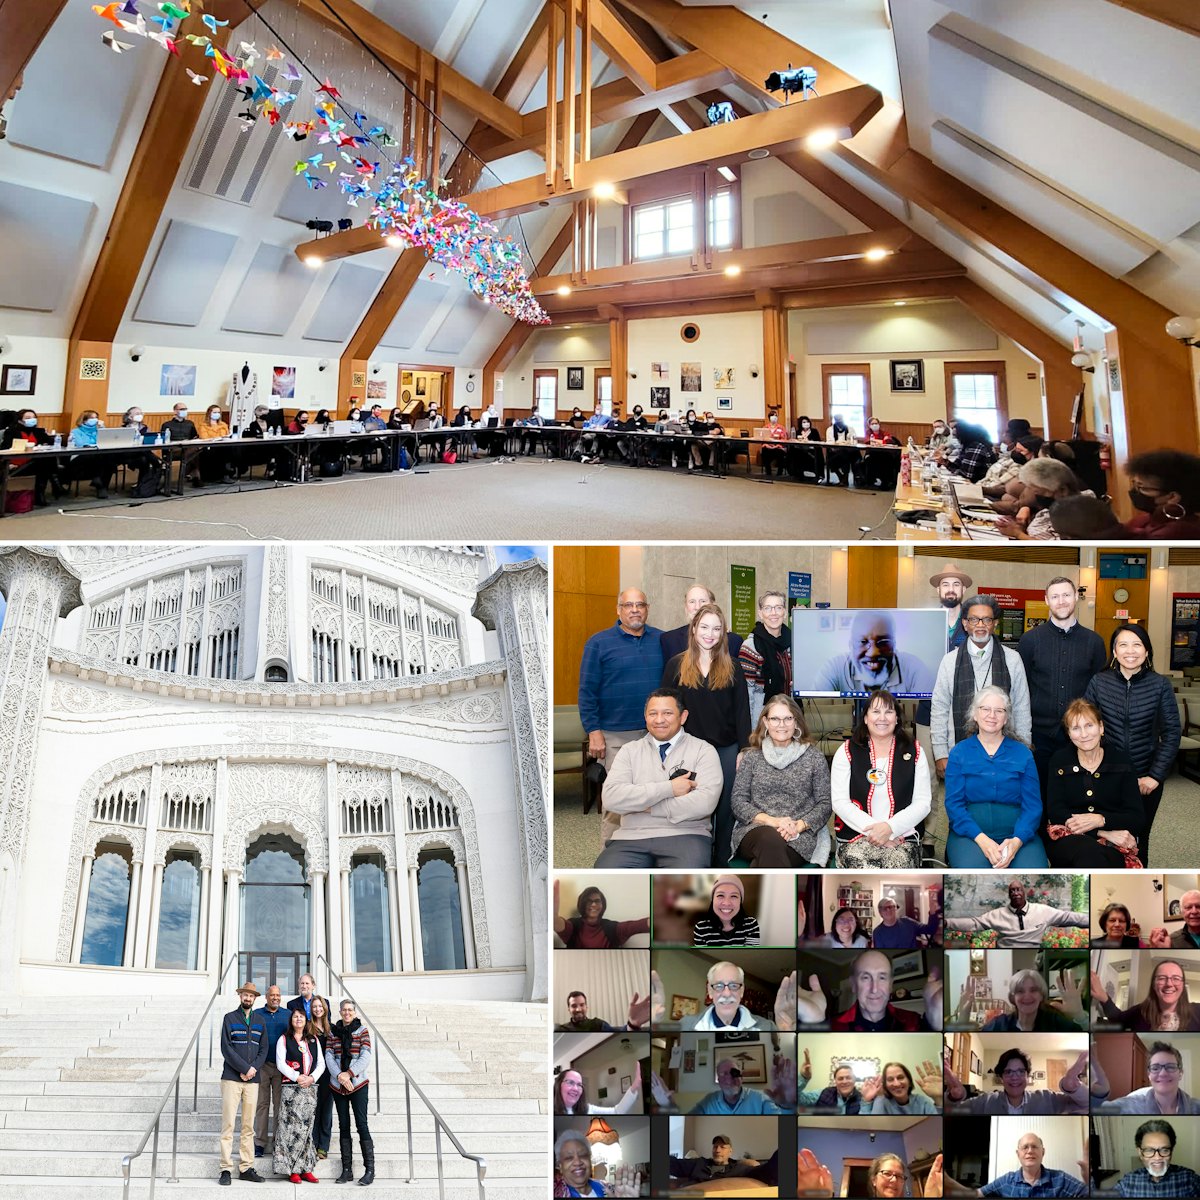 In the United States, representatives from Bahá’í institutions gathered at the Green Acre Bahá’í School in Maine as well at the Bahá’í House of Worship in Illinois to discuss the upcoming local conferences, which will explore ‘Abdu’l-Bahá’s vision of the spiritual future of that country and the principle of the oneness of humanity.